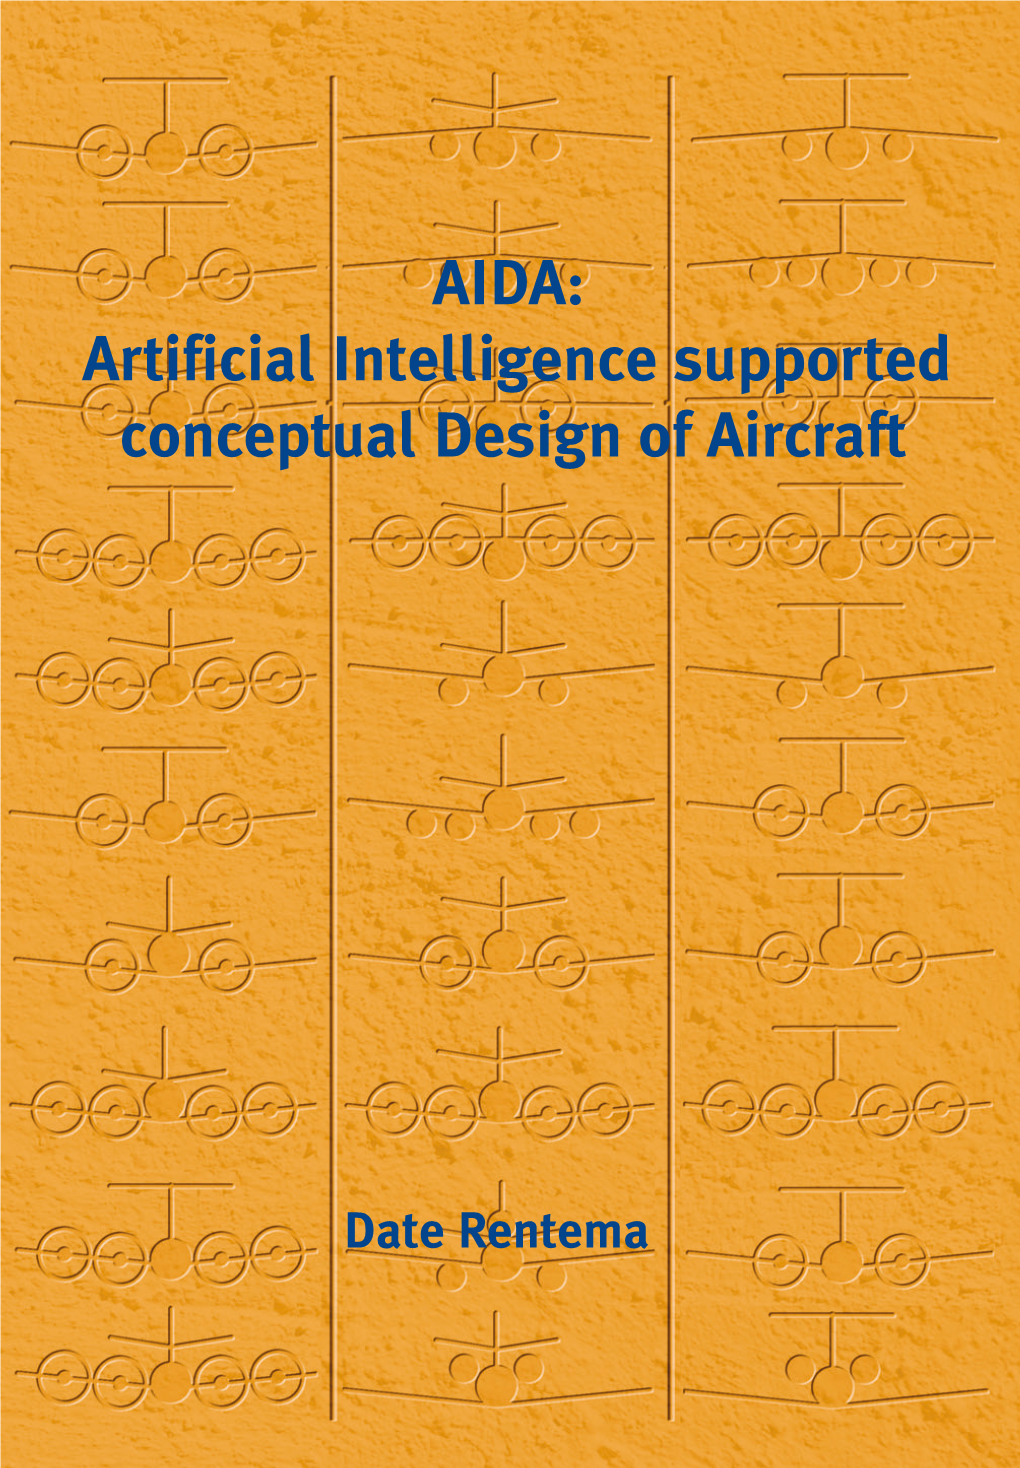 Artificial Intelligence Supported Conceptual Design of Aircraft of Design Conceptual Supported Intelligence Artificial AIDA